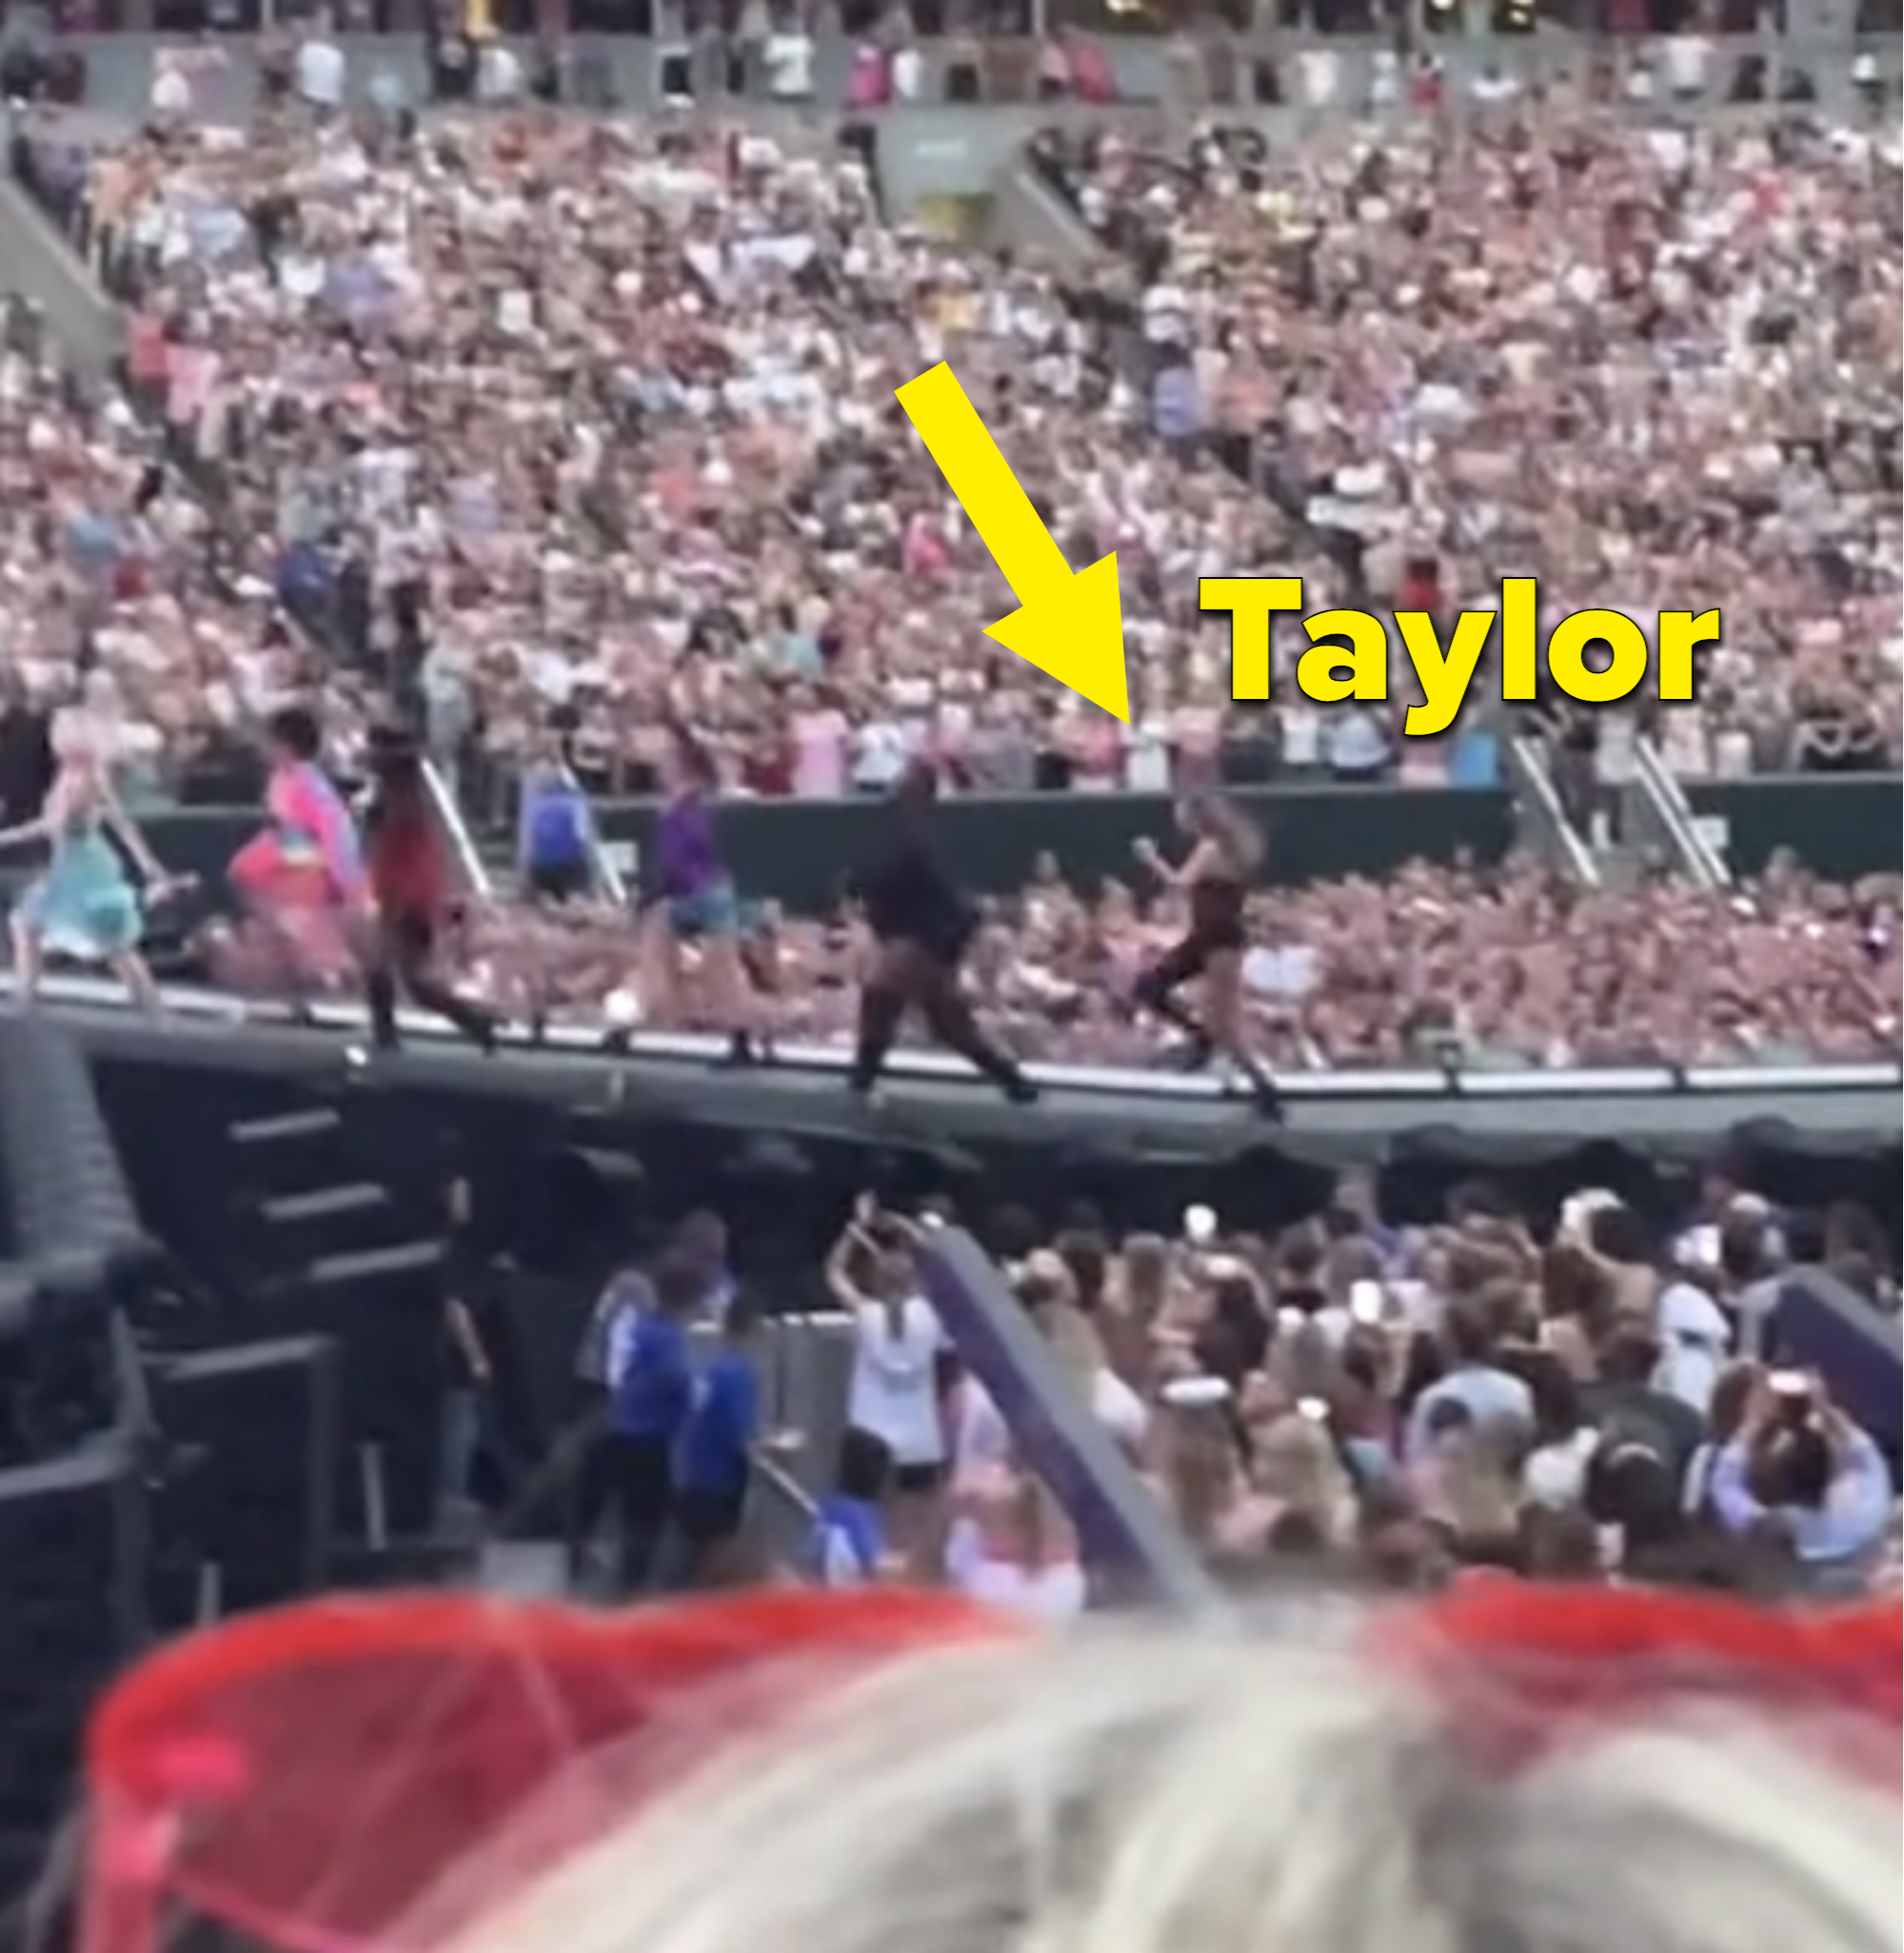 taylor running on stage